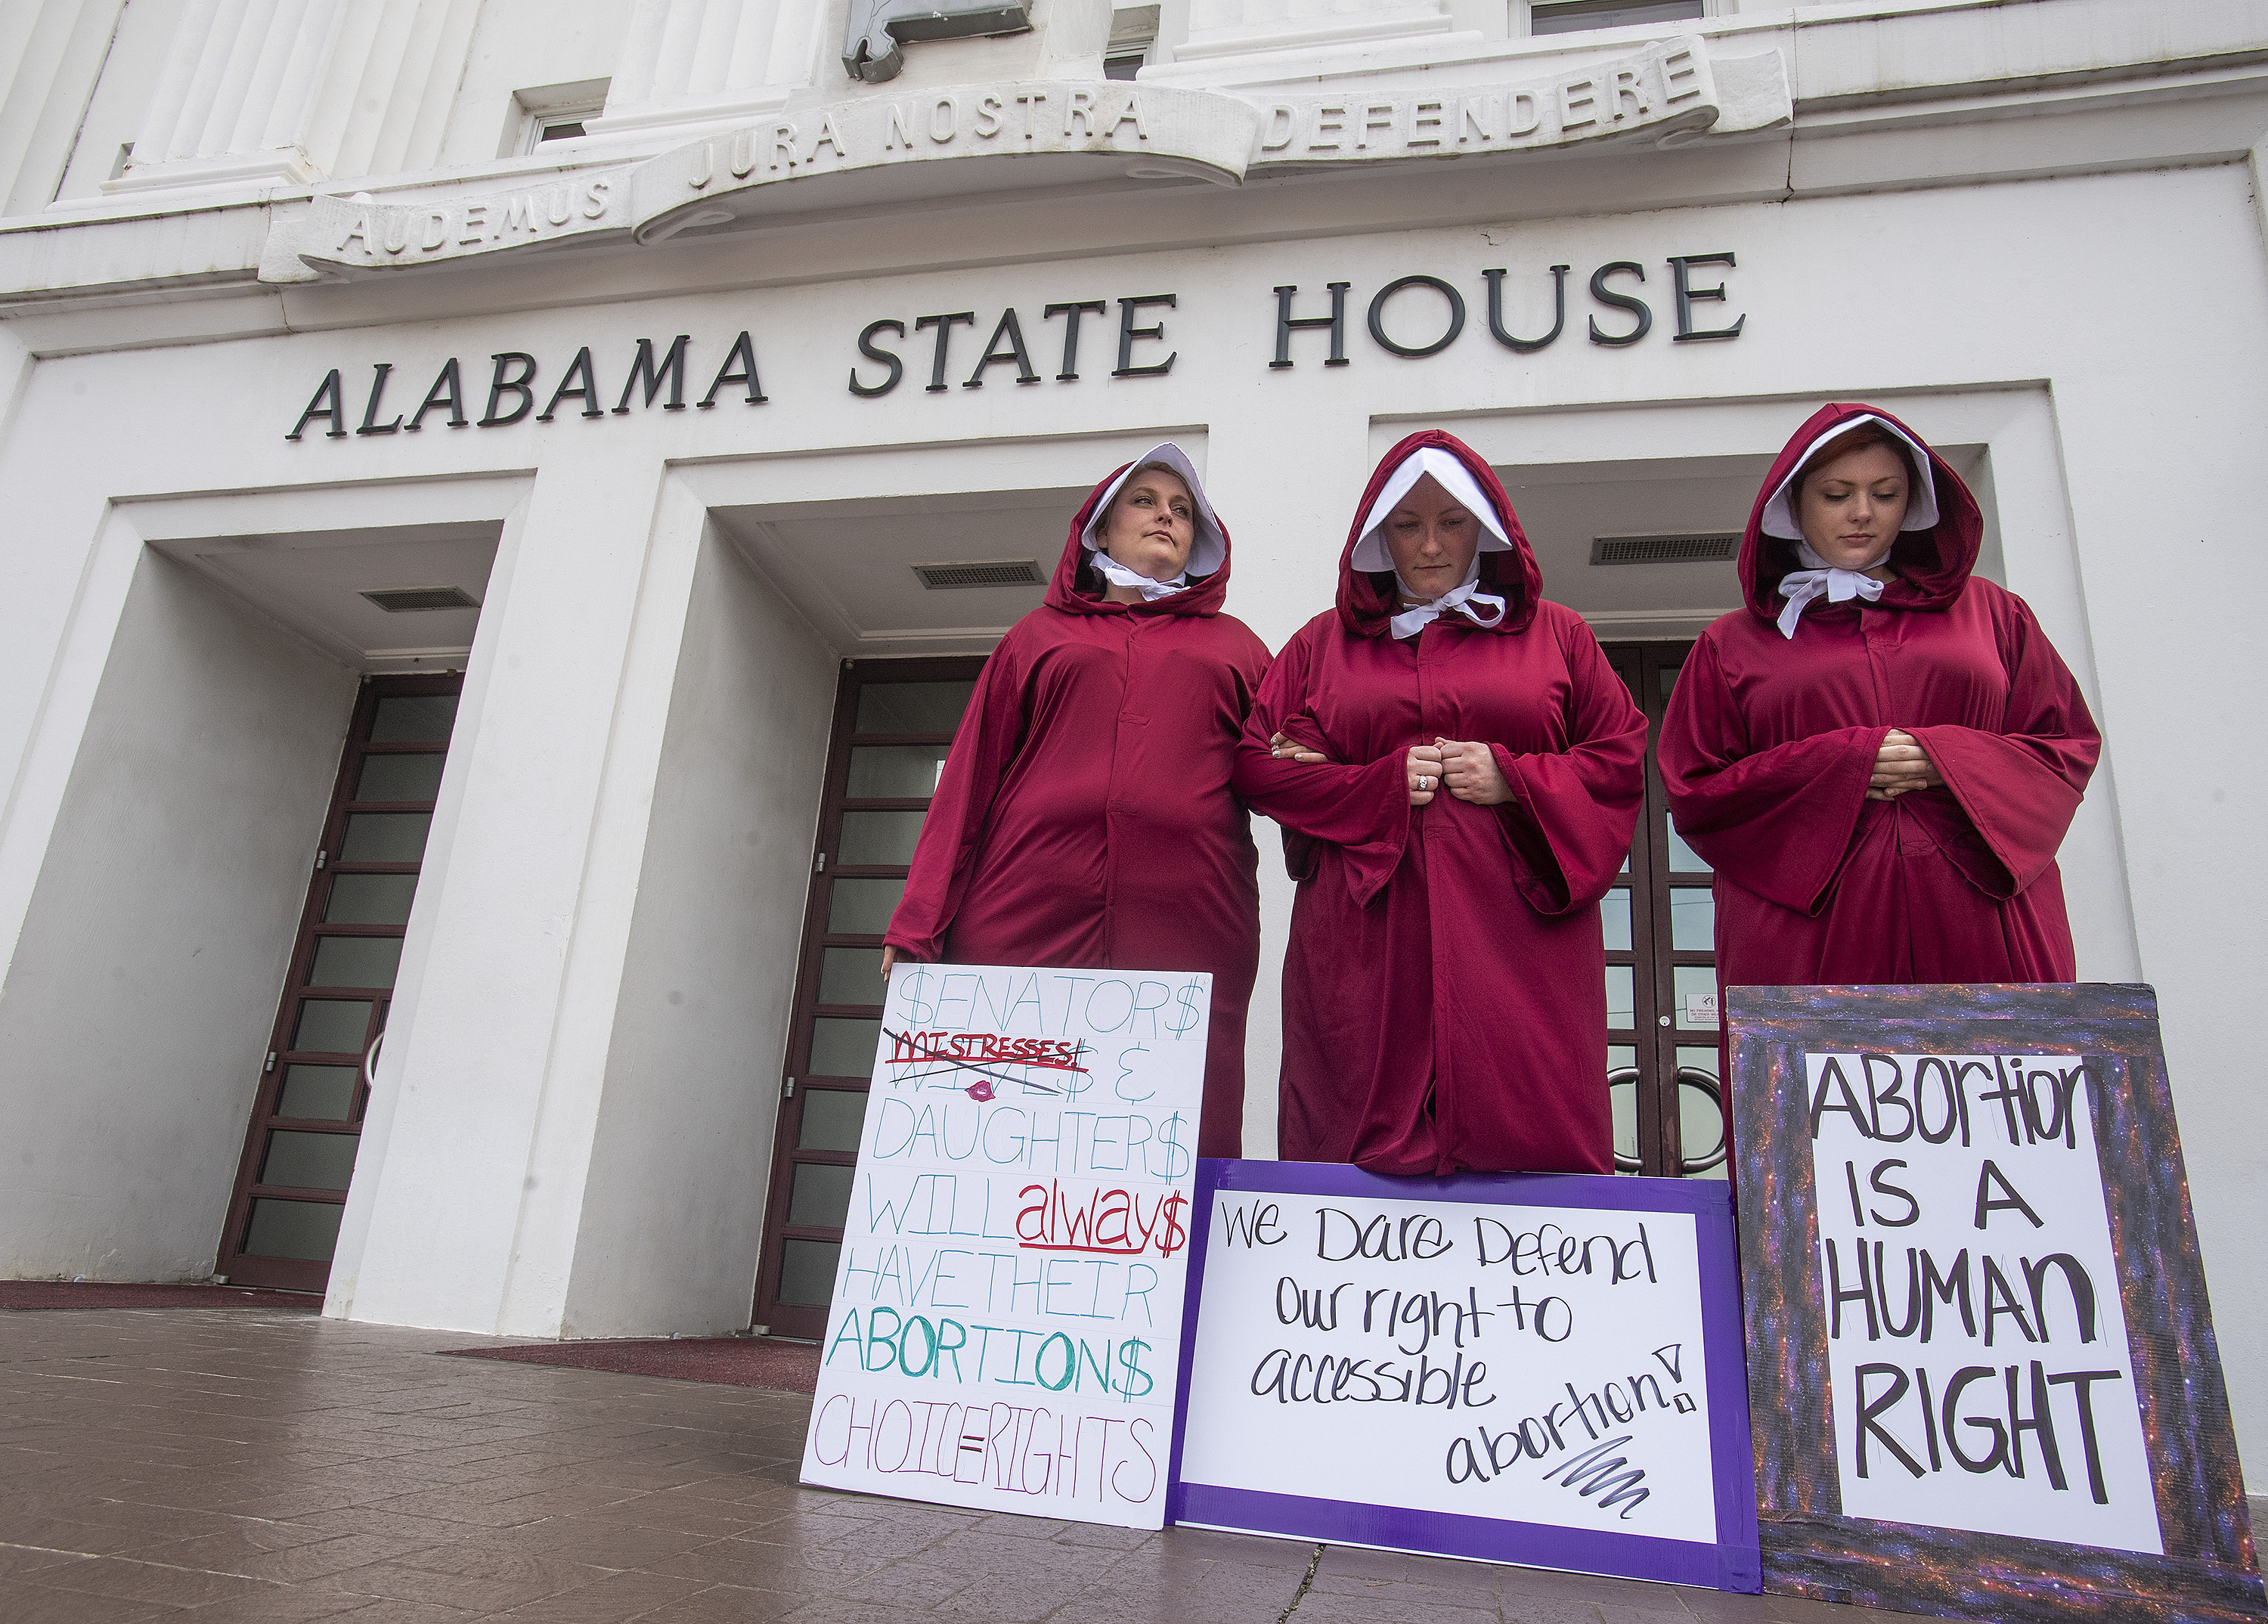 Bianca Cameron-Schwiesow, from left, Kari Crowe and Margeaux Hartline, dressed as handmaids, take part in a protest against HB314, the abortion ban bill, at the Alabama State House in Montgomery, Ala., on Wednesday April 17, 2019. (Mickey Welsh/The Montgomery Advertiser via AP) (Mickey Welsh—The Montgomery Advertiser/AP)